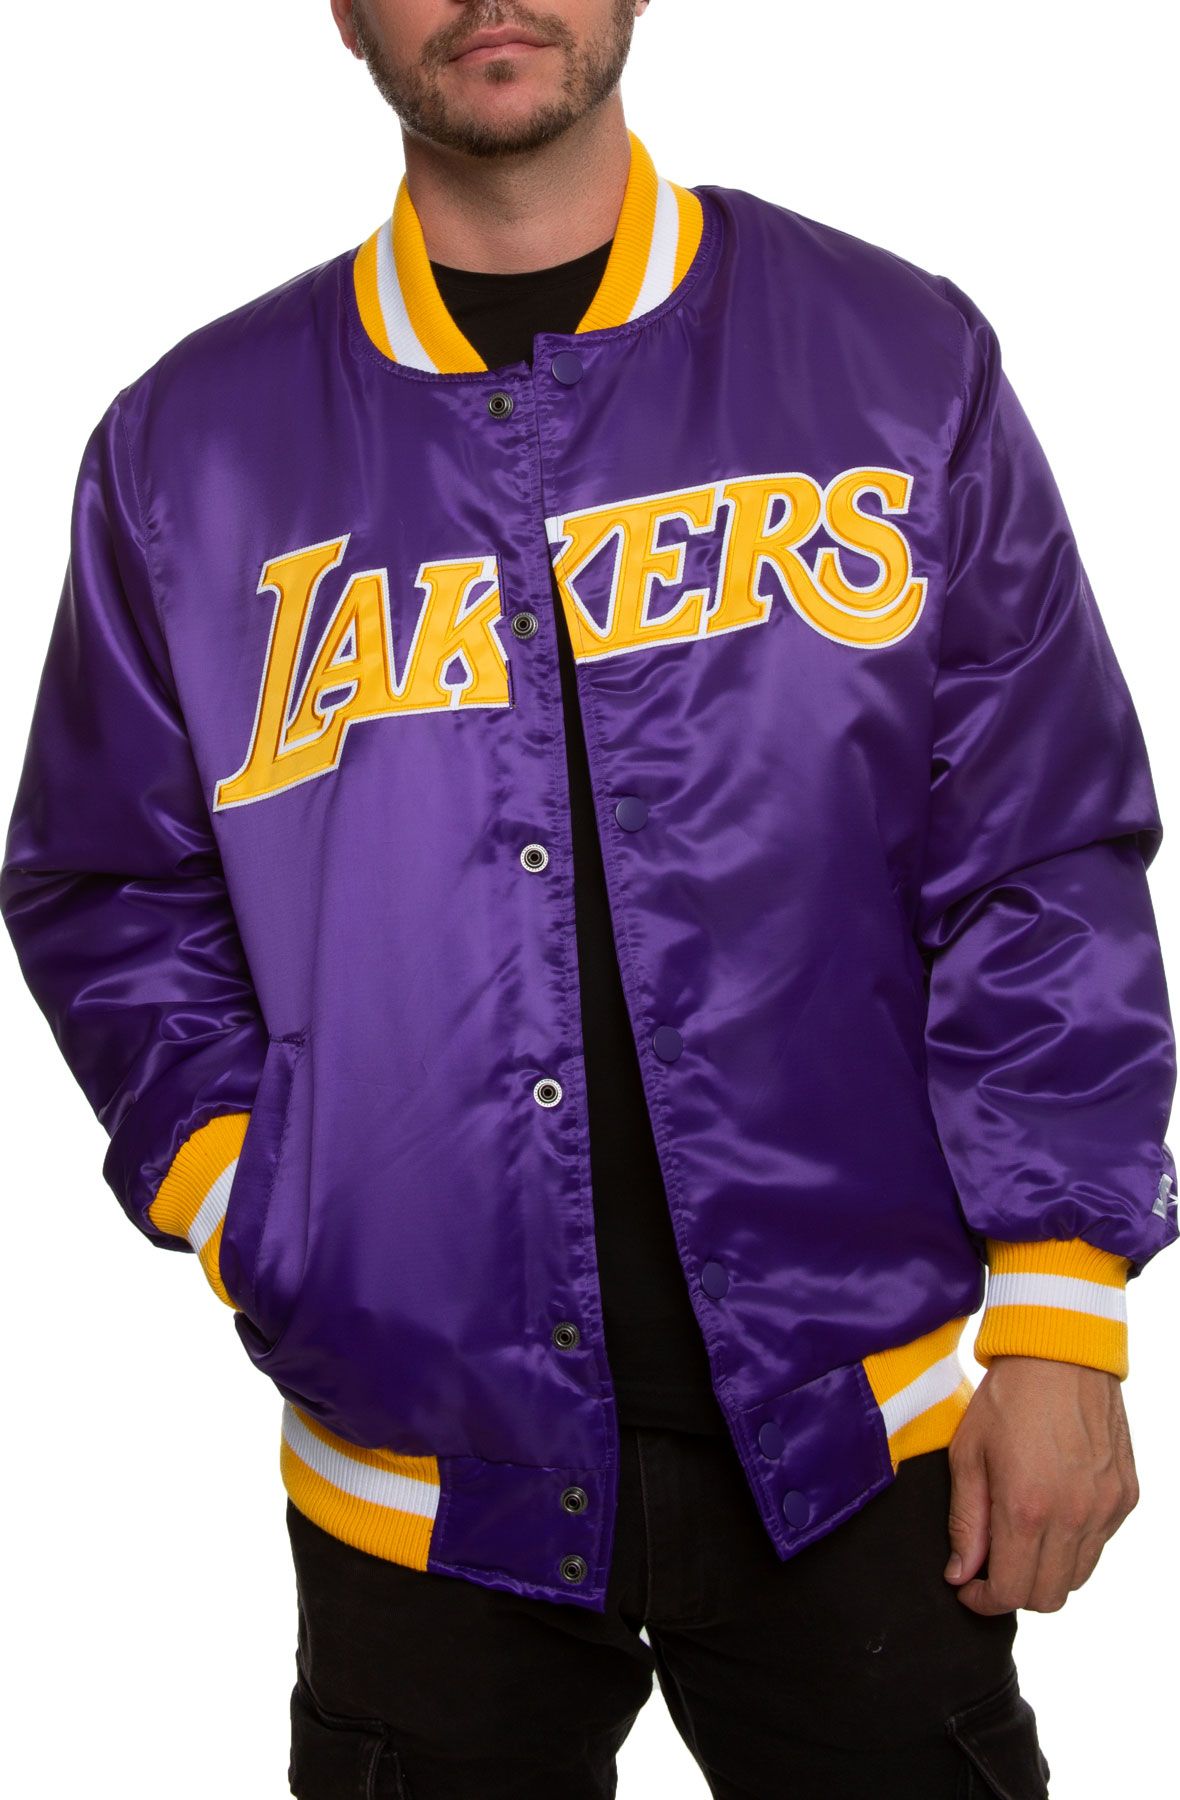 Kobe Bryant in white Lakers warmup jacket looks on before a pre